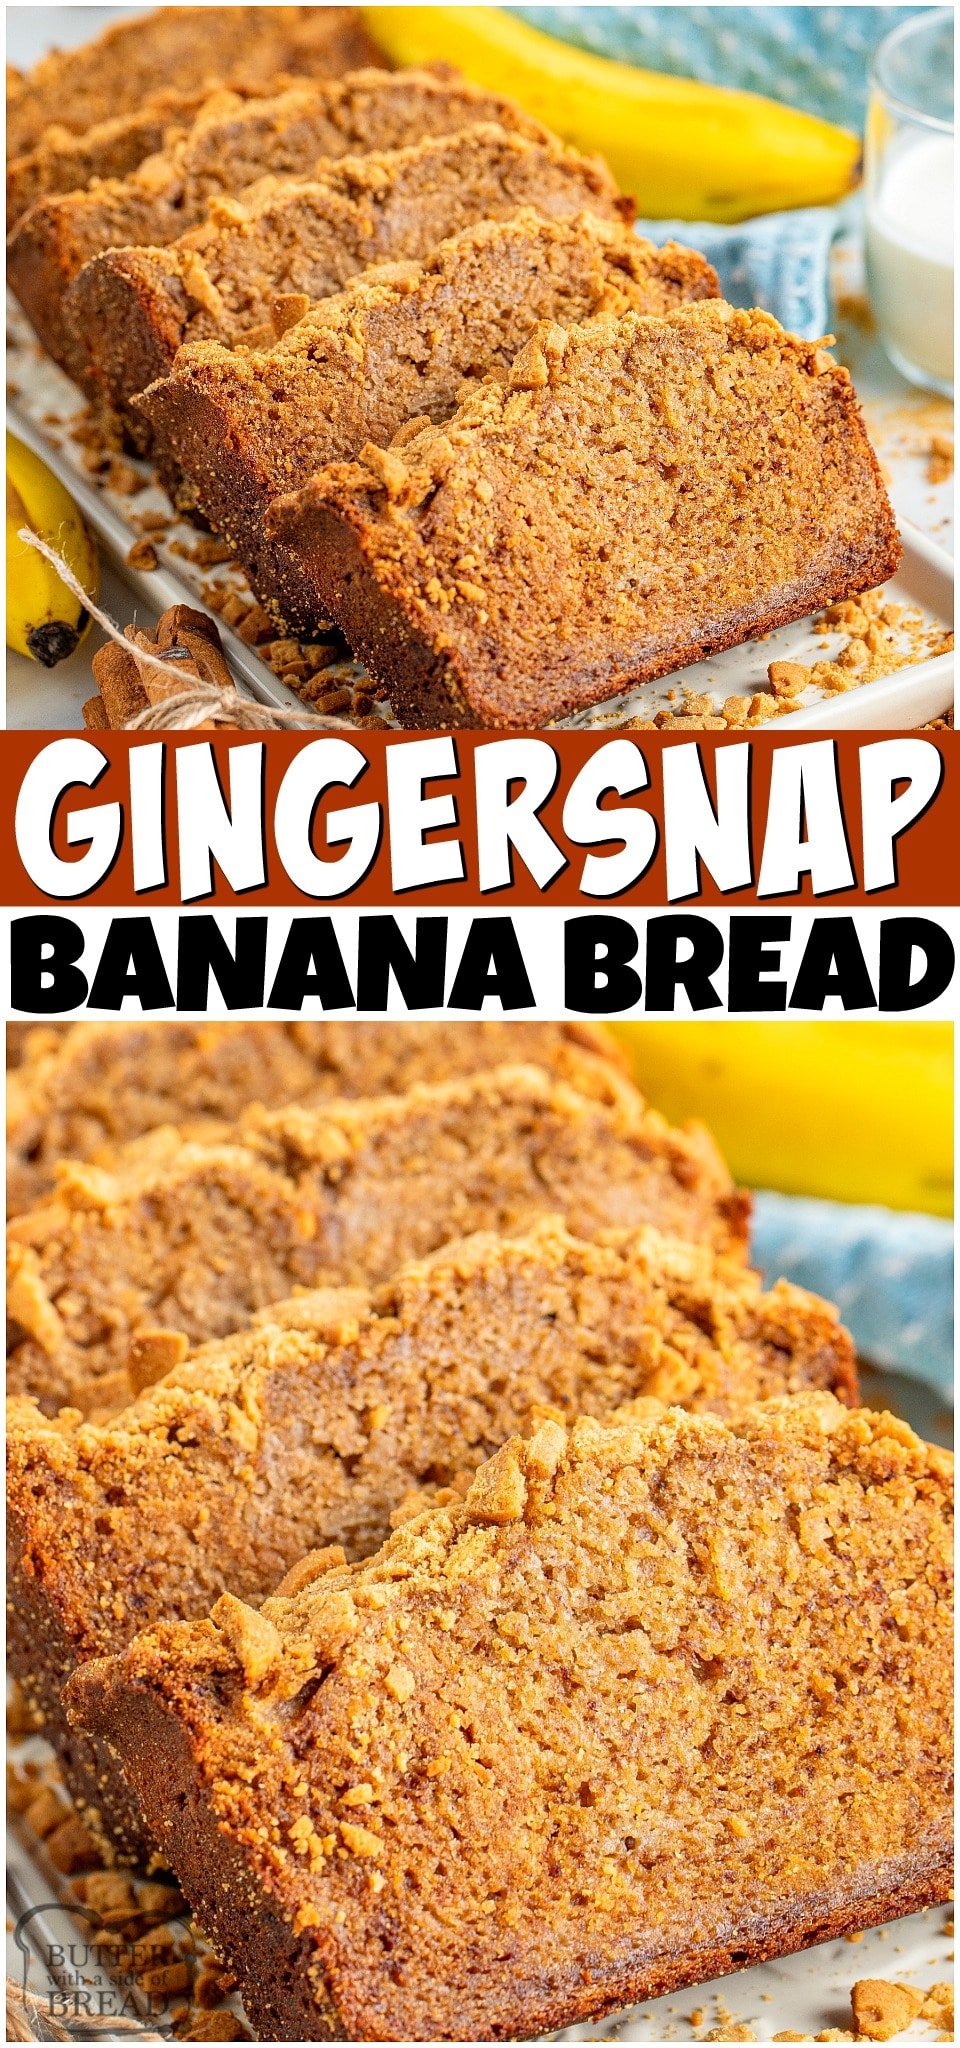 Gingersnap Banana Bread is a spiced banana bread recipe topped with crushed gingersnap cookies! The flavors meld into perfection in this incredible banana quick bread. 